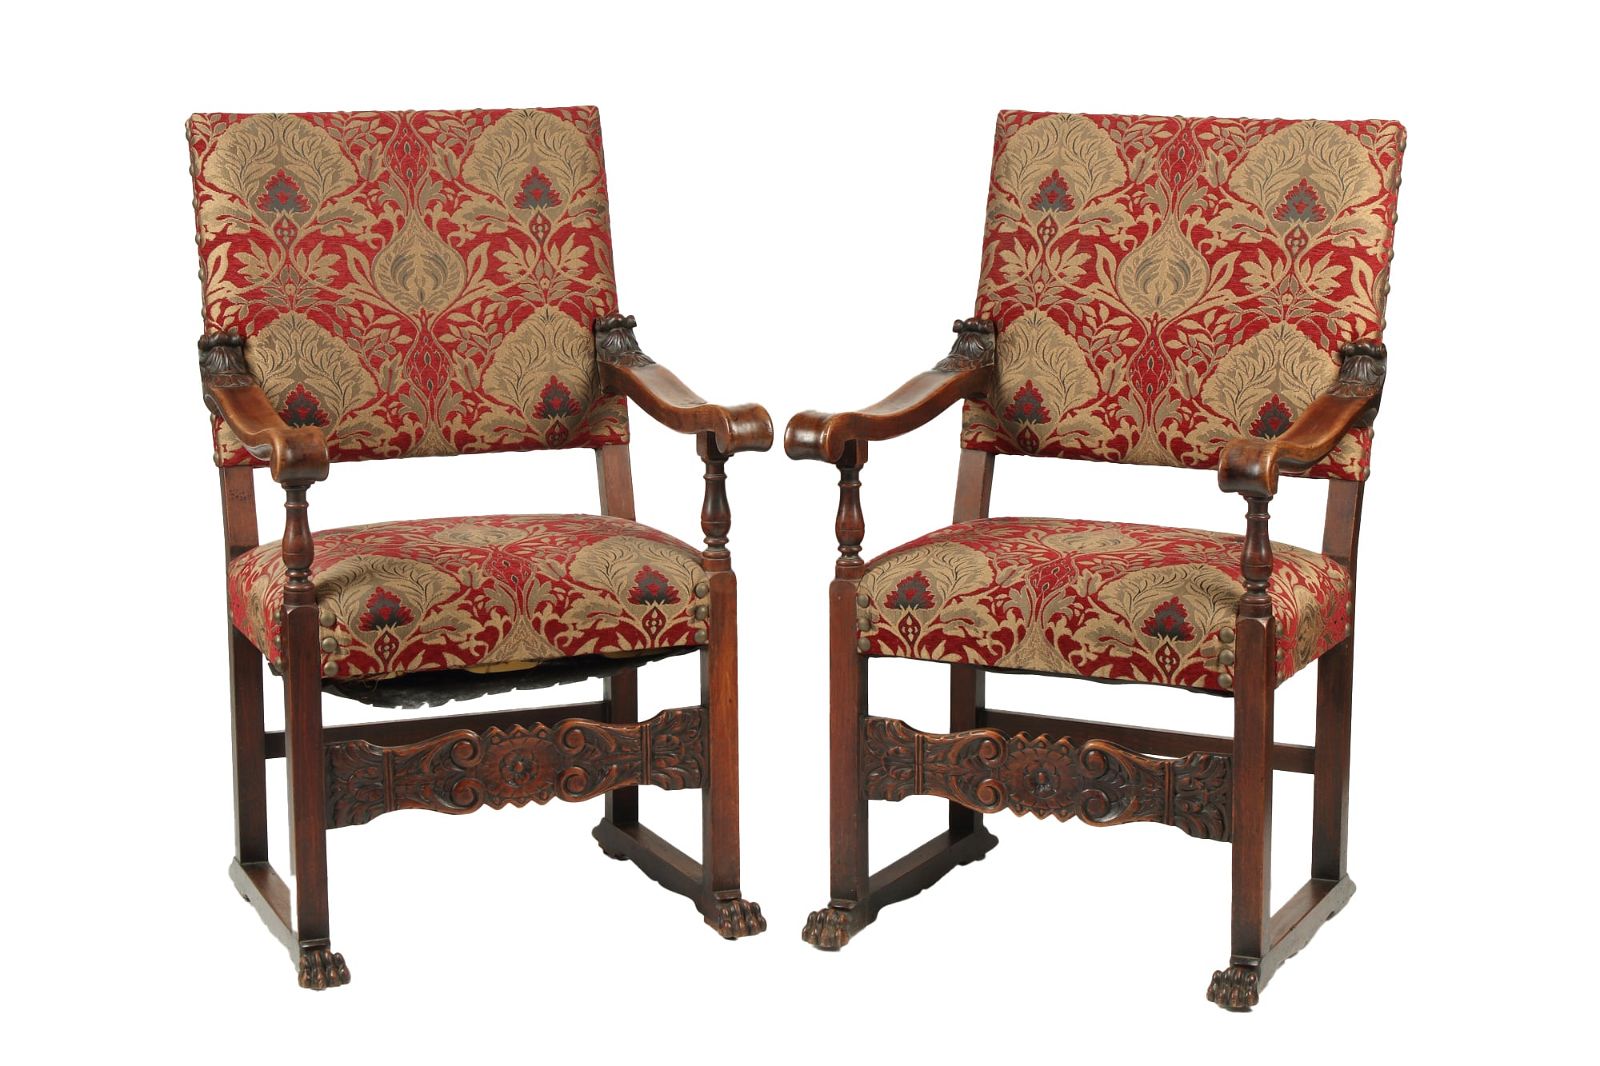 A PAIR OF ITALIAN BAROQUE STYLE